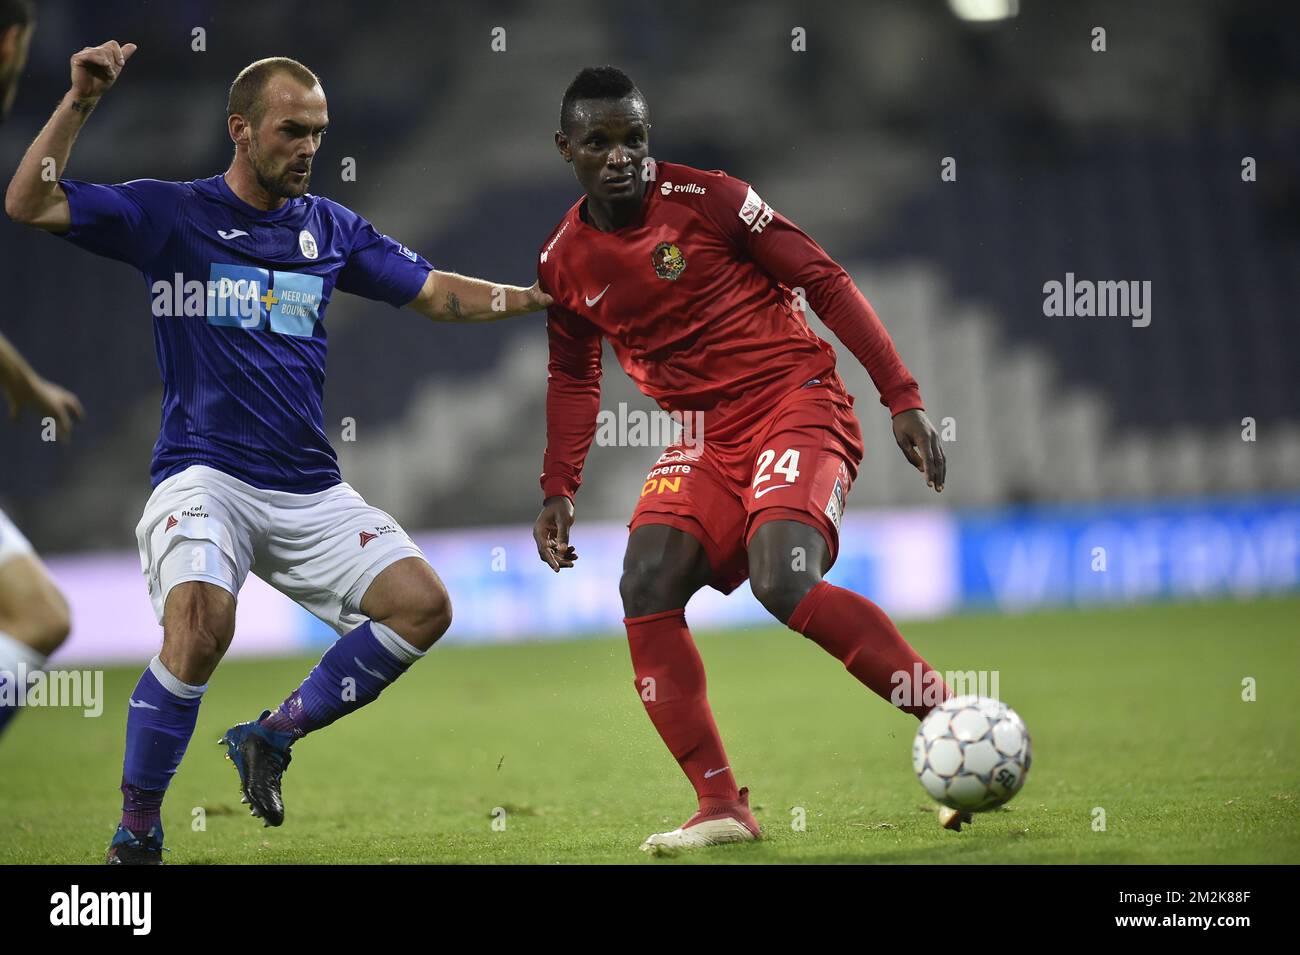 Beerschot's Alexander Maes and Tubize's Salomon Nirisarike fight for the  ball during a soccer game between Beerschot Wilrijk and AFC Tubize,  Saturday 06 October 2018 in Antwerp, on the ninth day of